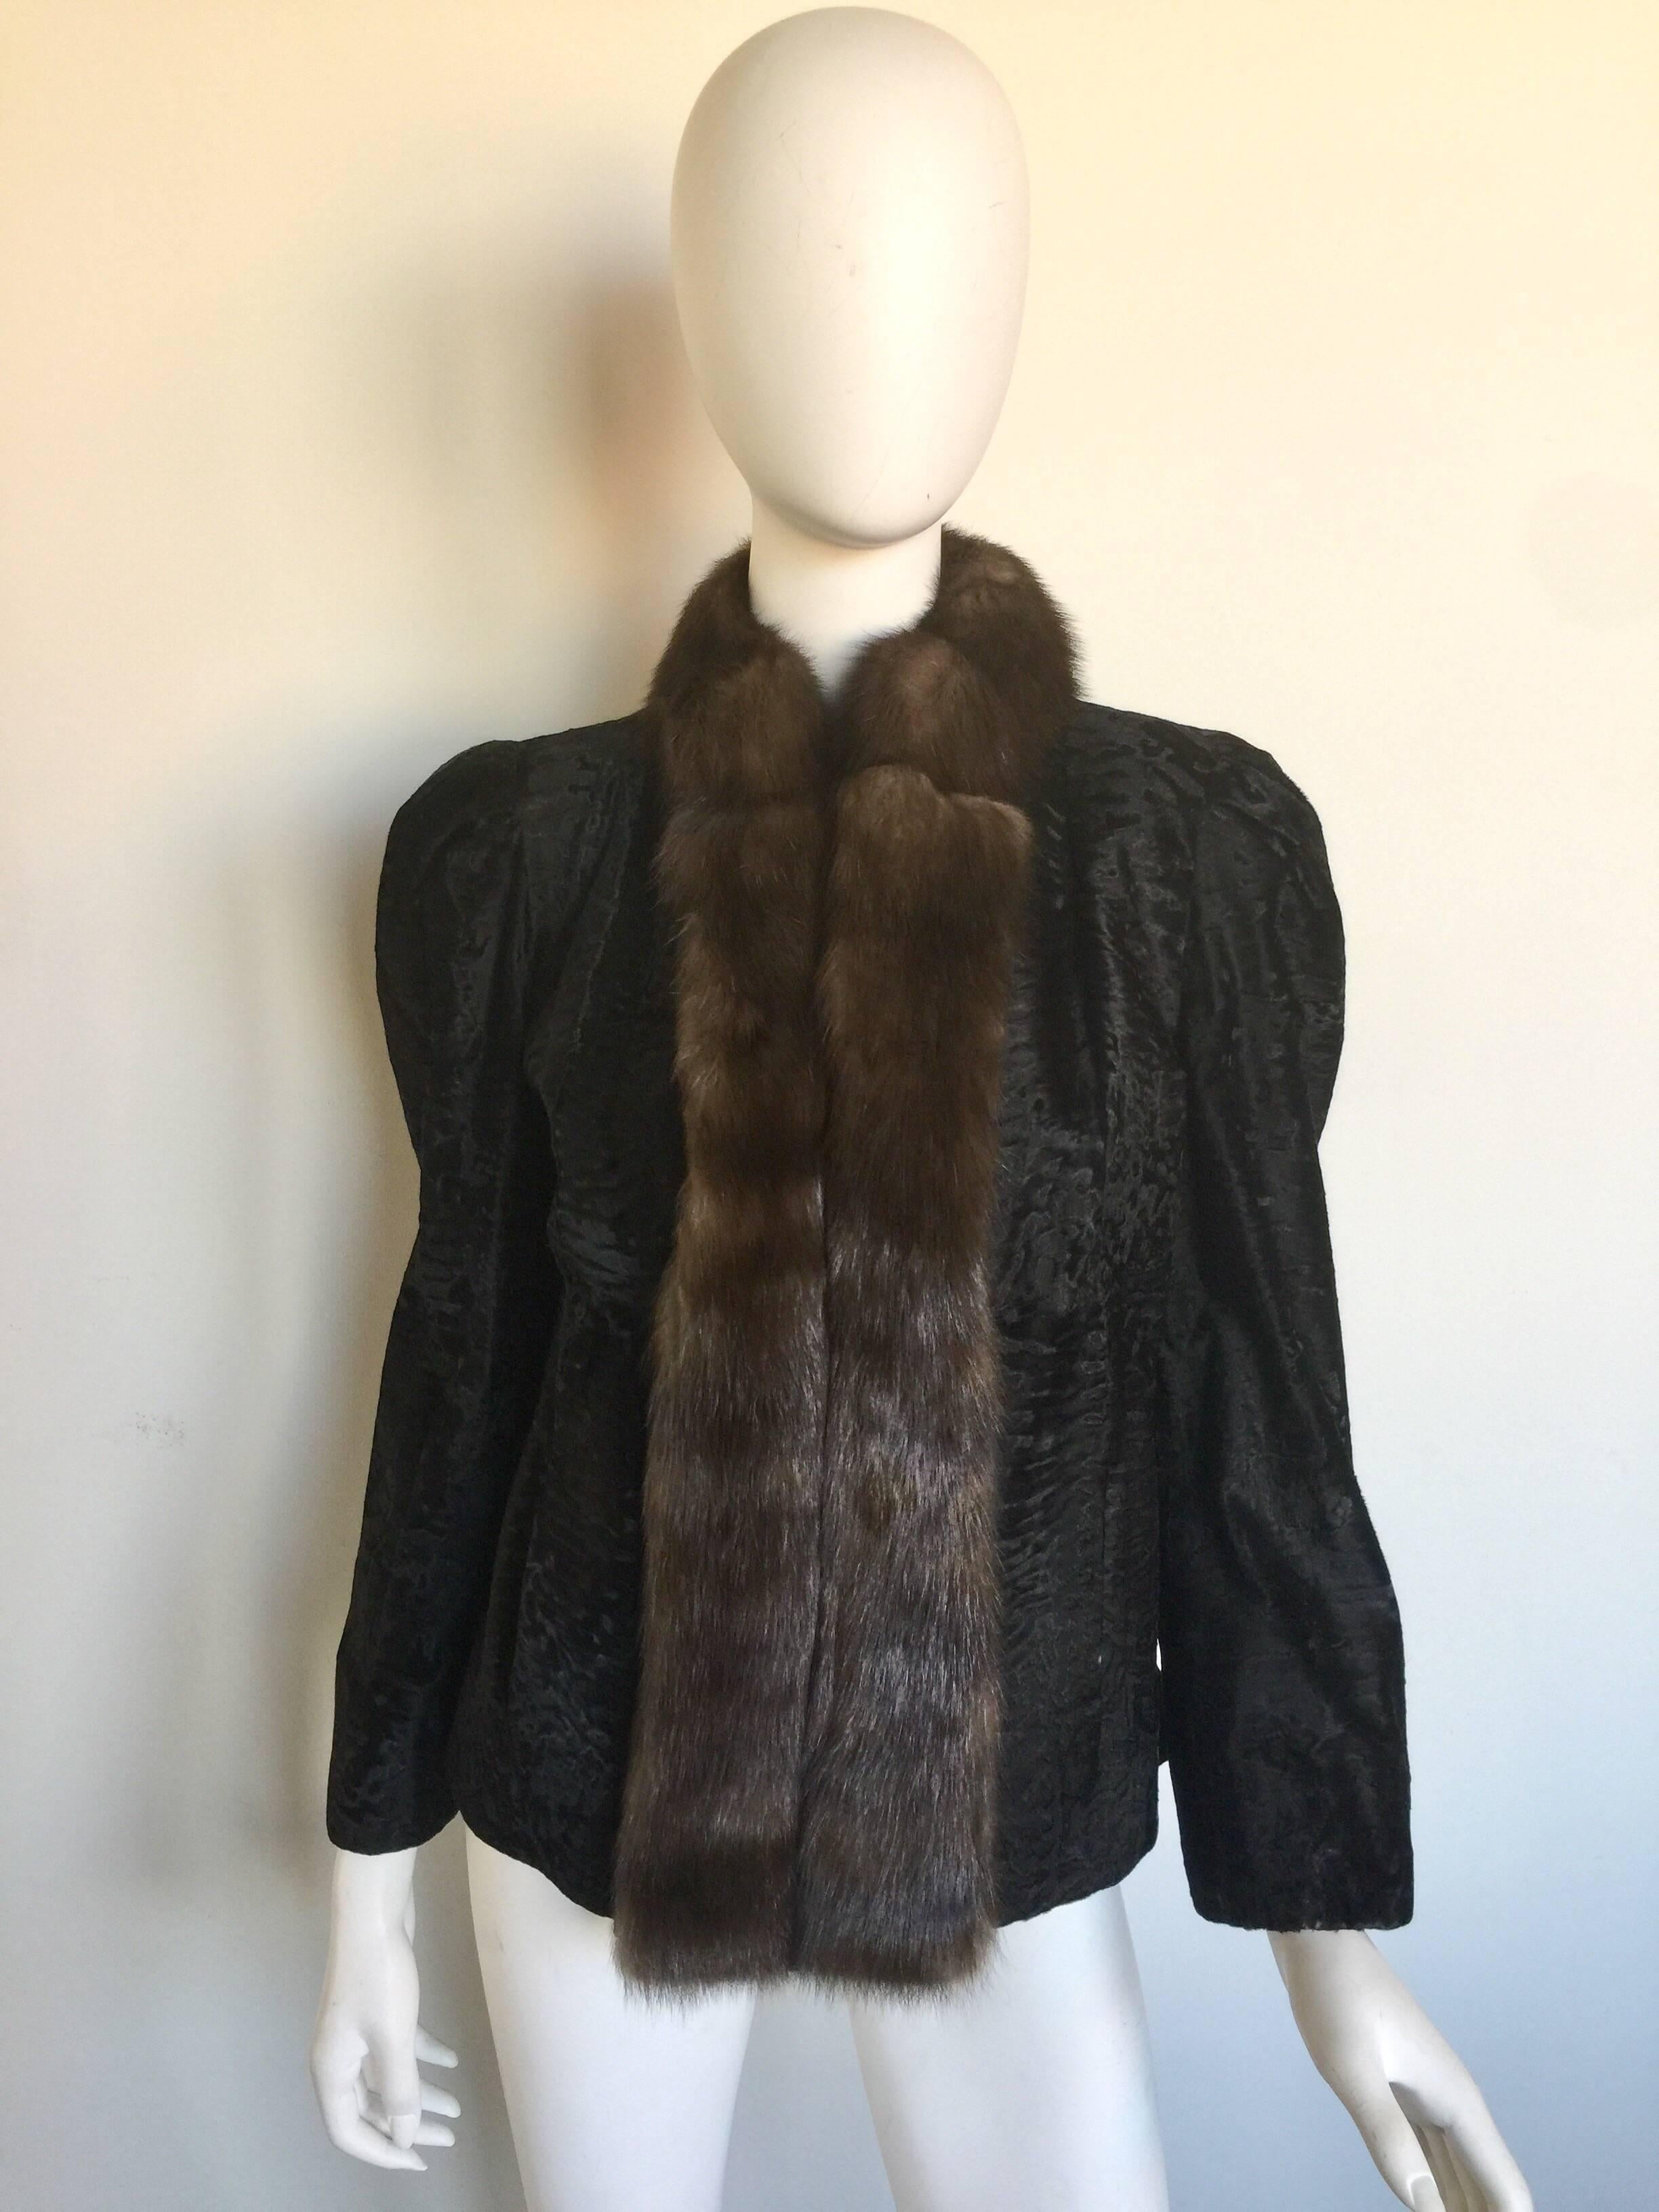 This jacket has a black broadtail lamb exterior embossed with a faint pattern. The front of the coat has a brown female mink fur lapel and collar. The coat is fully lined and has two front hidden pockets. The jacket has a hook enclosure and gathered